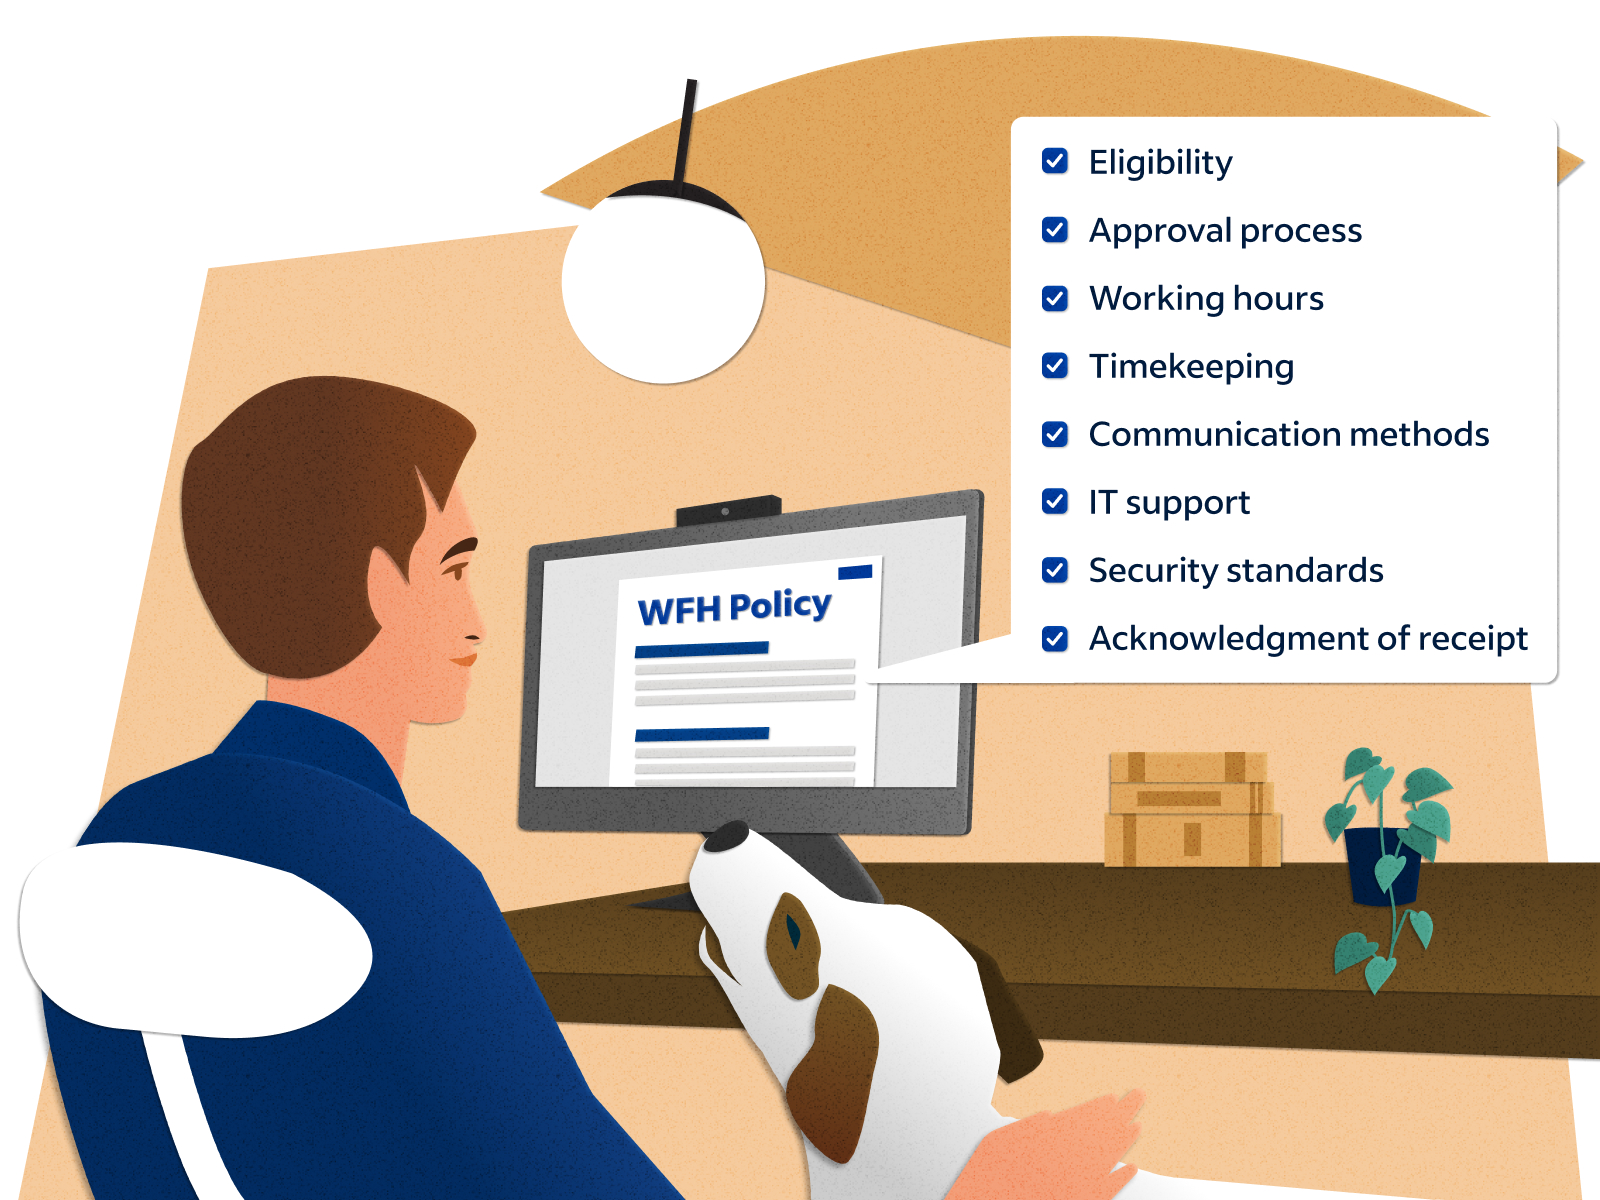 How To Make A Work-From-Home Policy (With Examples) – Forbes Advisor